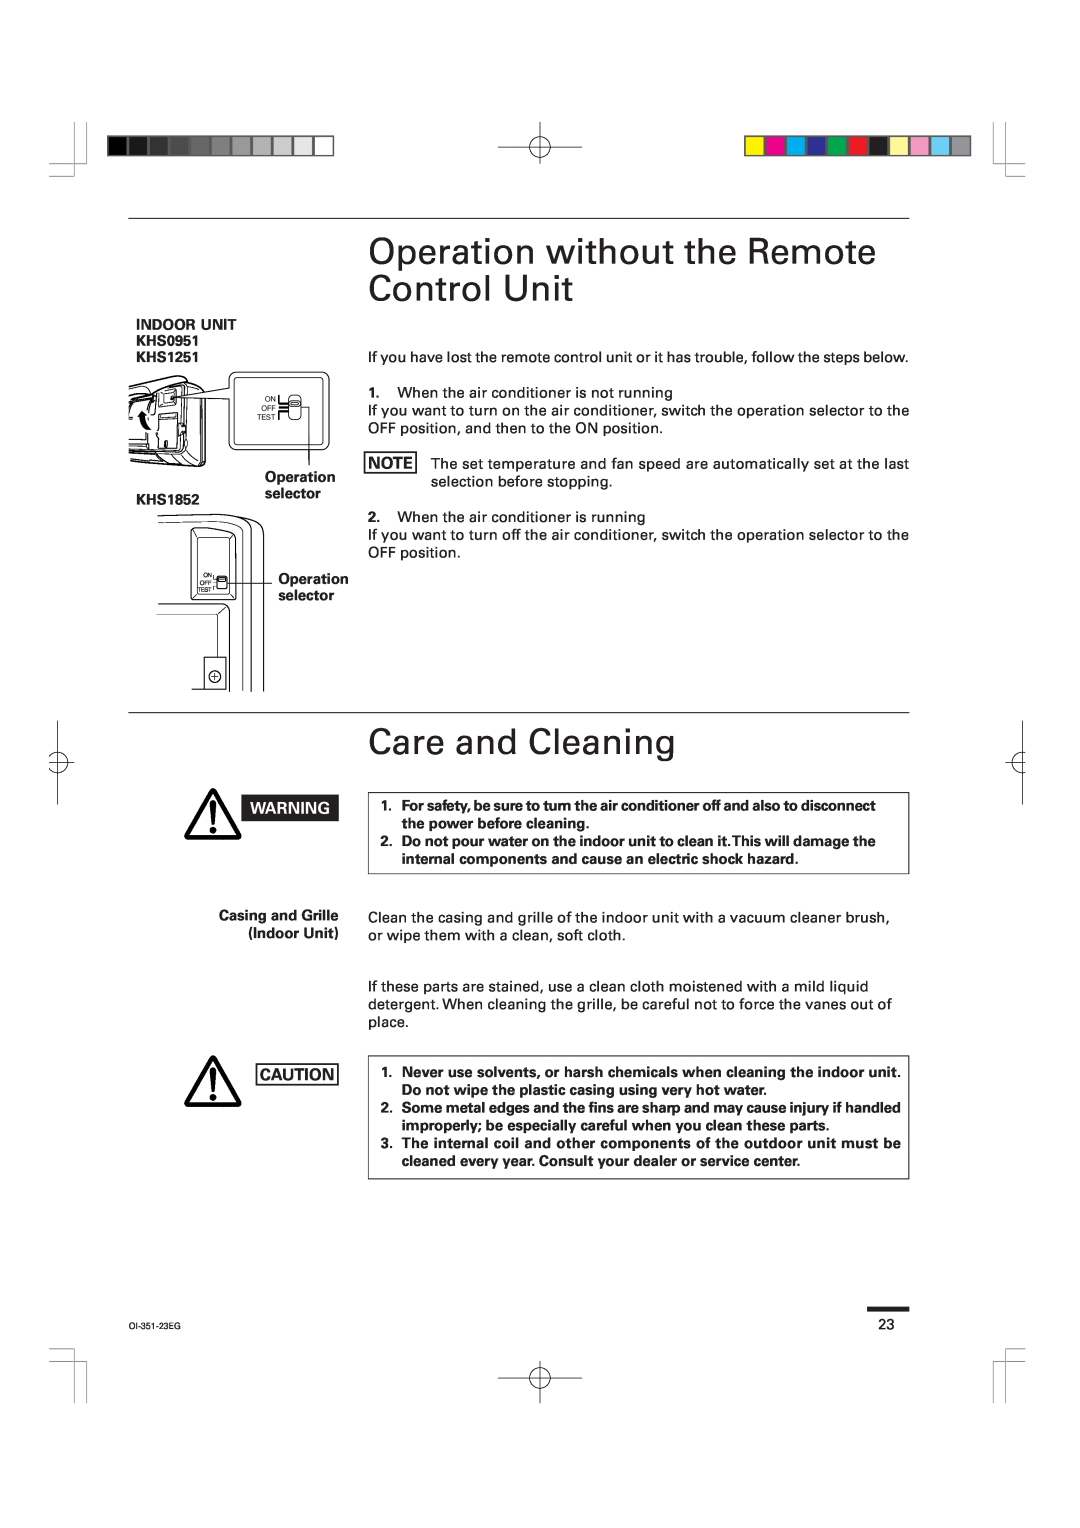 Sanyo KHS1251, KHS1852, KHS0951 instruction manual Operation without the Remote Control Unit, Care and Cleaning 